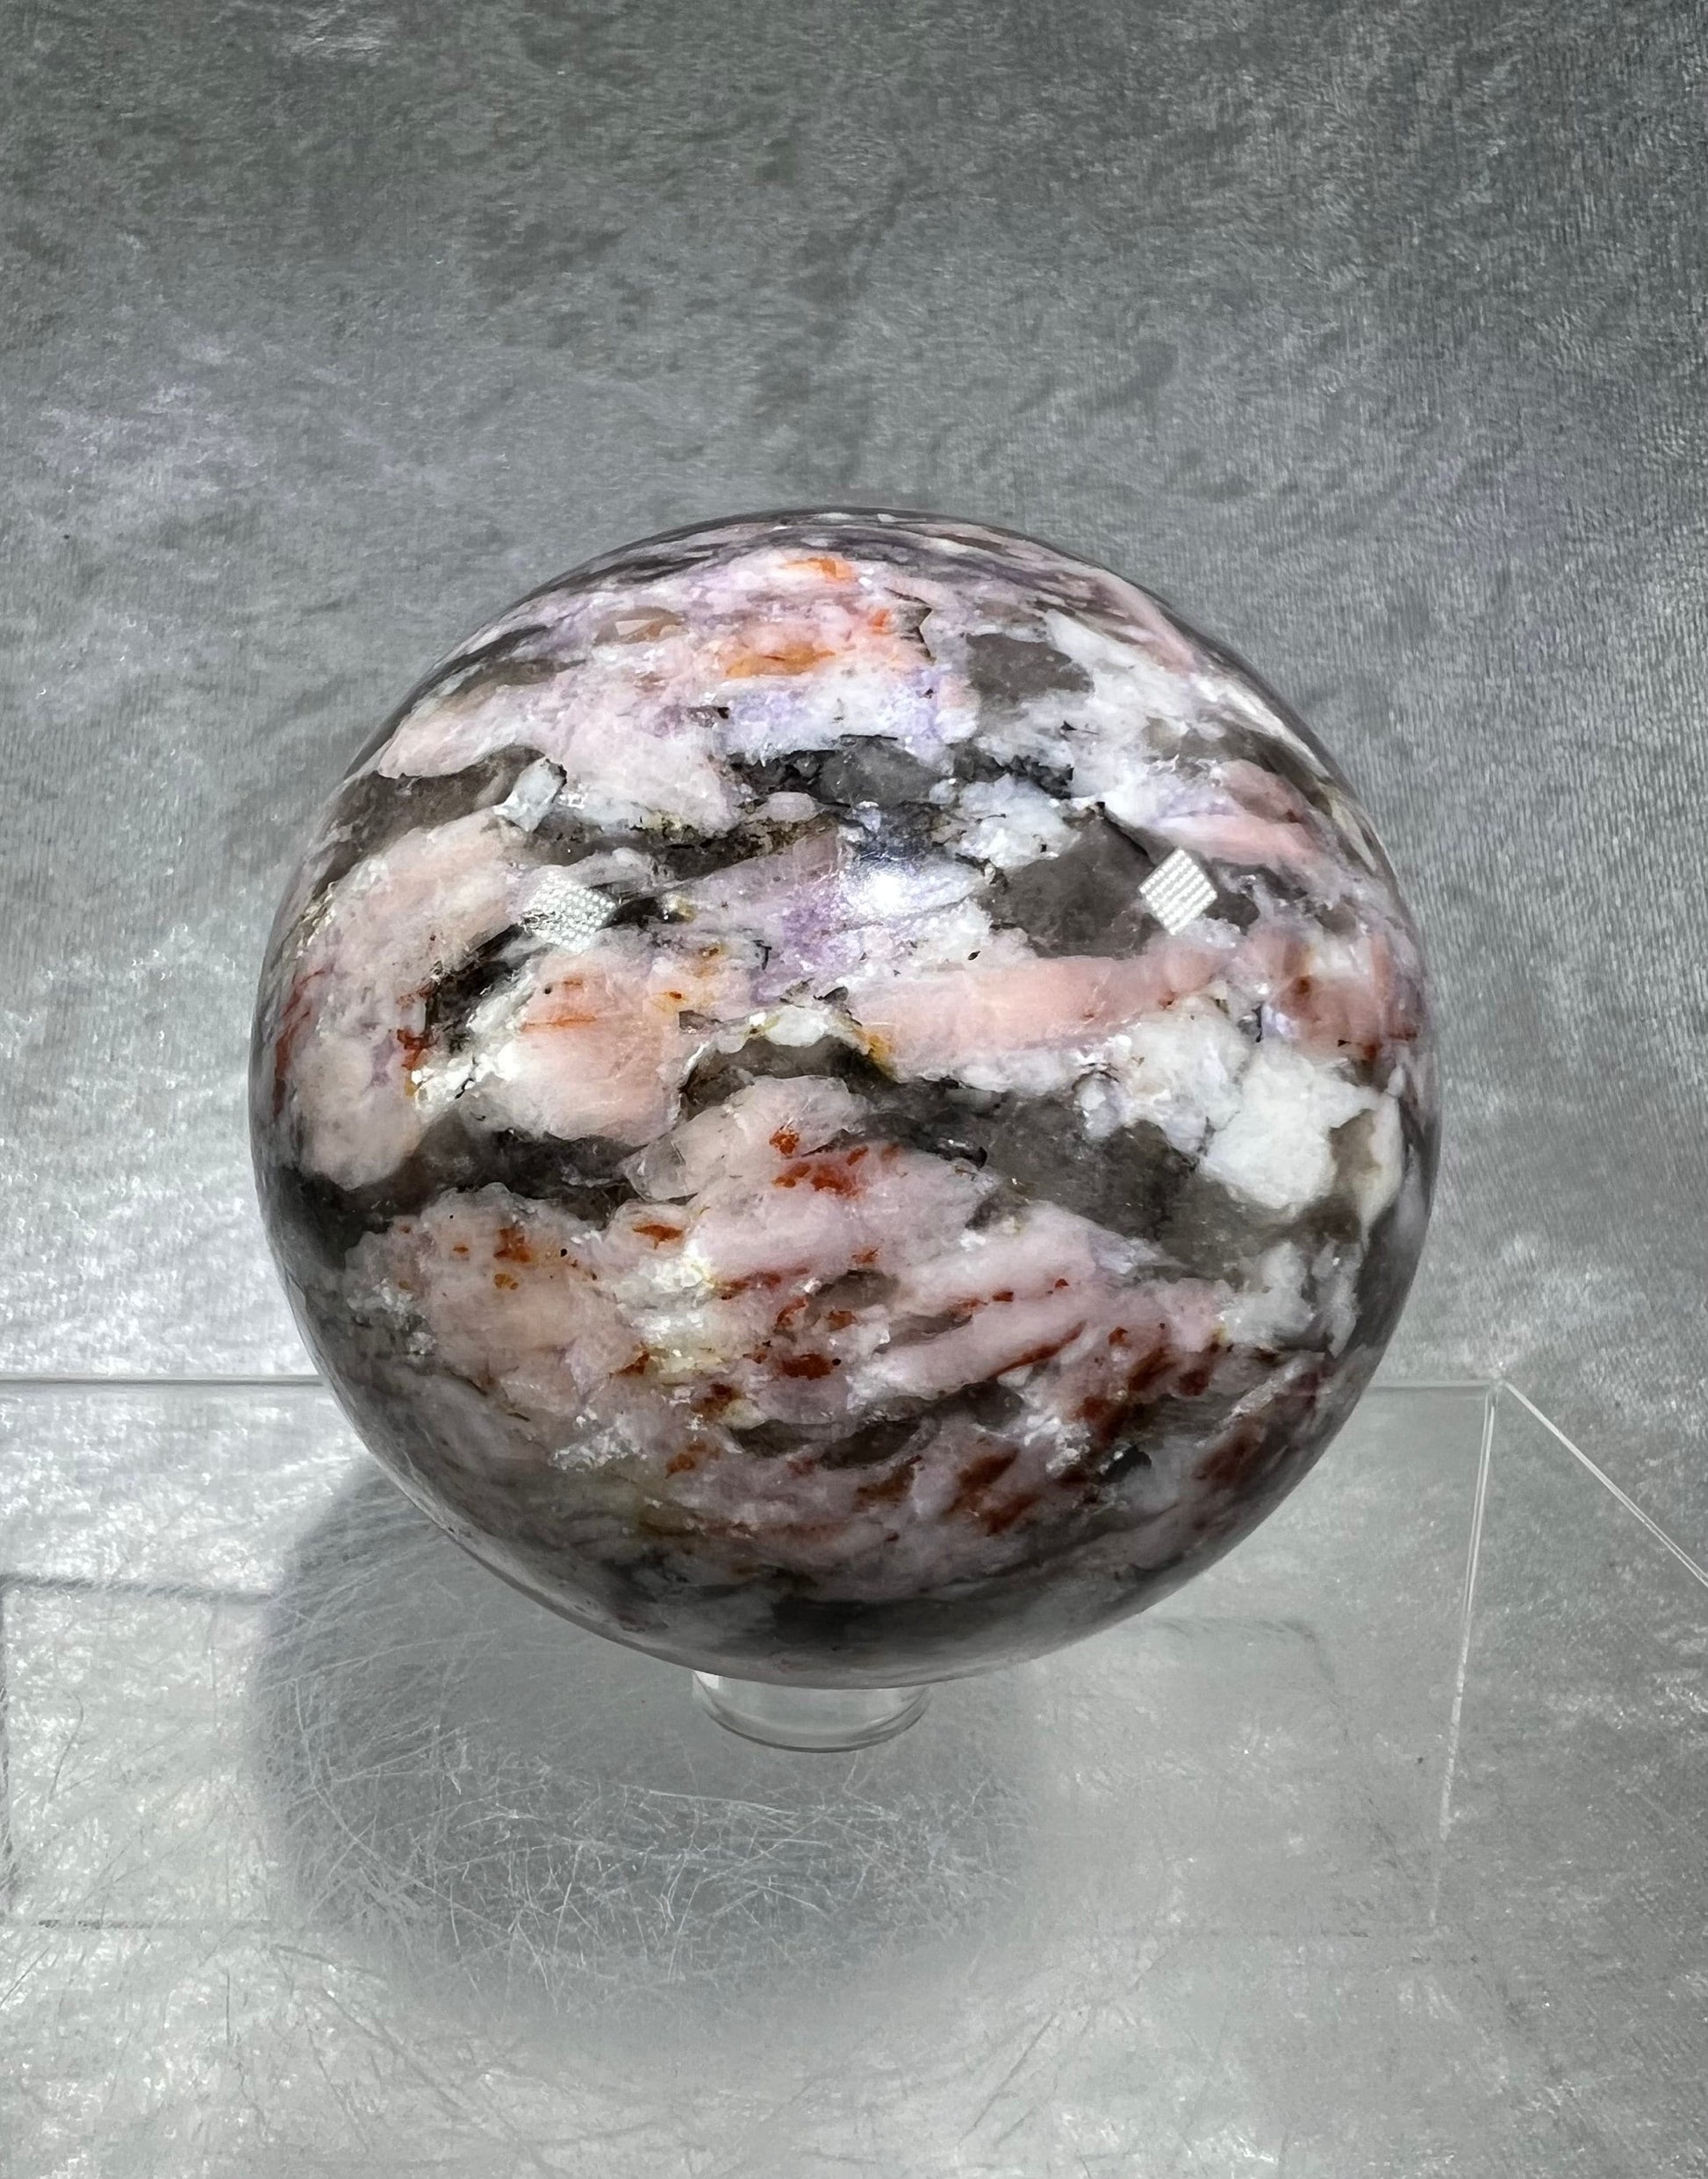 Gorgeous Large Kunzite And Lepidolite Crystal Sphere. 72mm. Rare And Very Nice Quality. Amazing UV Reaction.